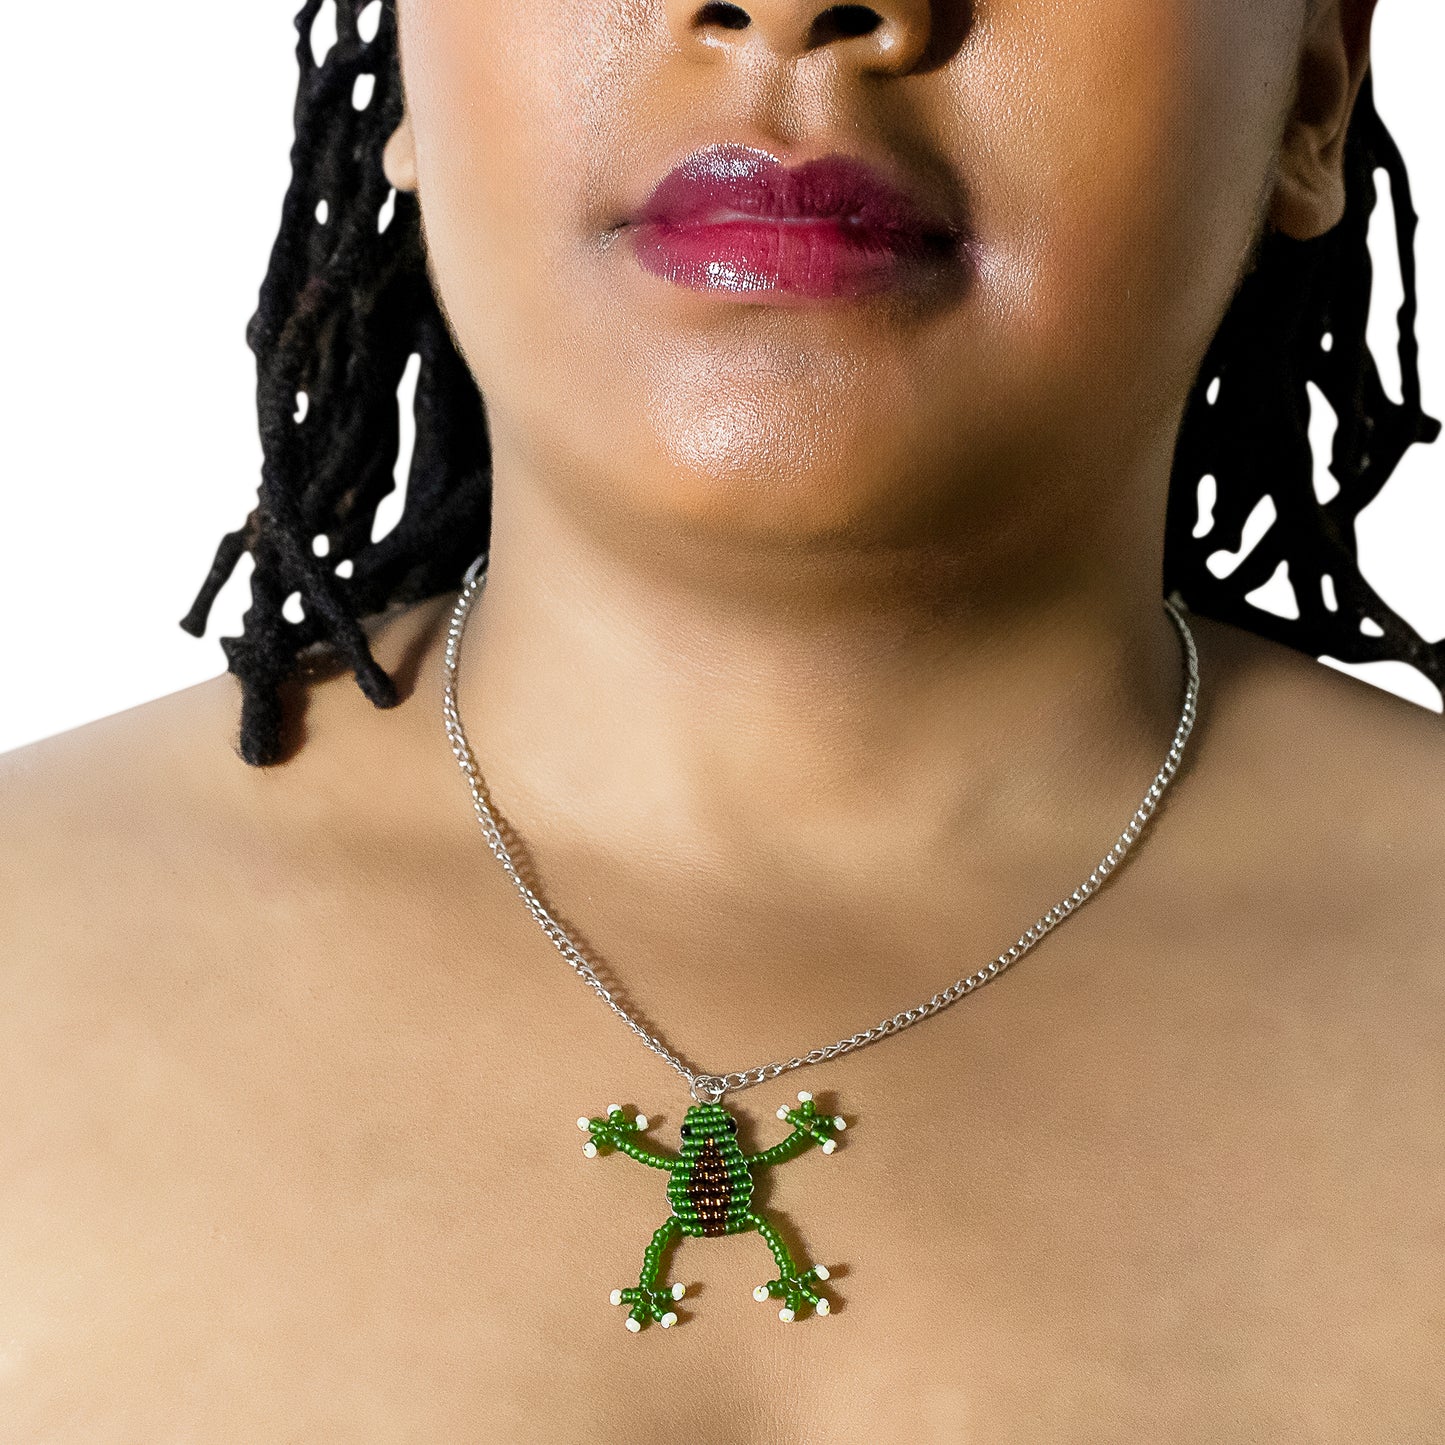 Frog pendant necklace